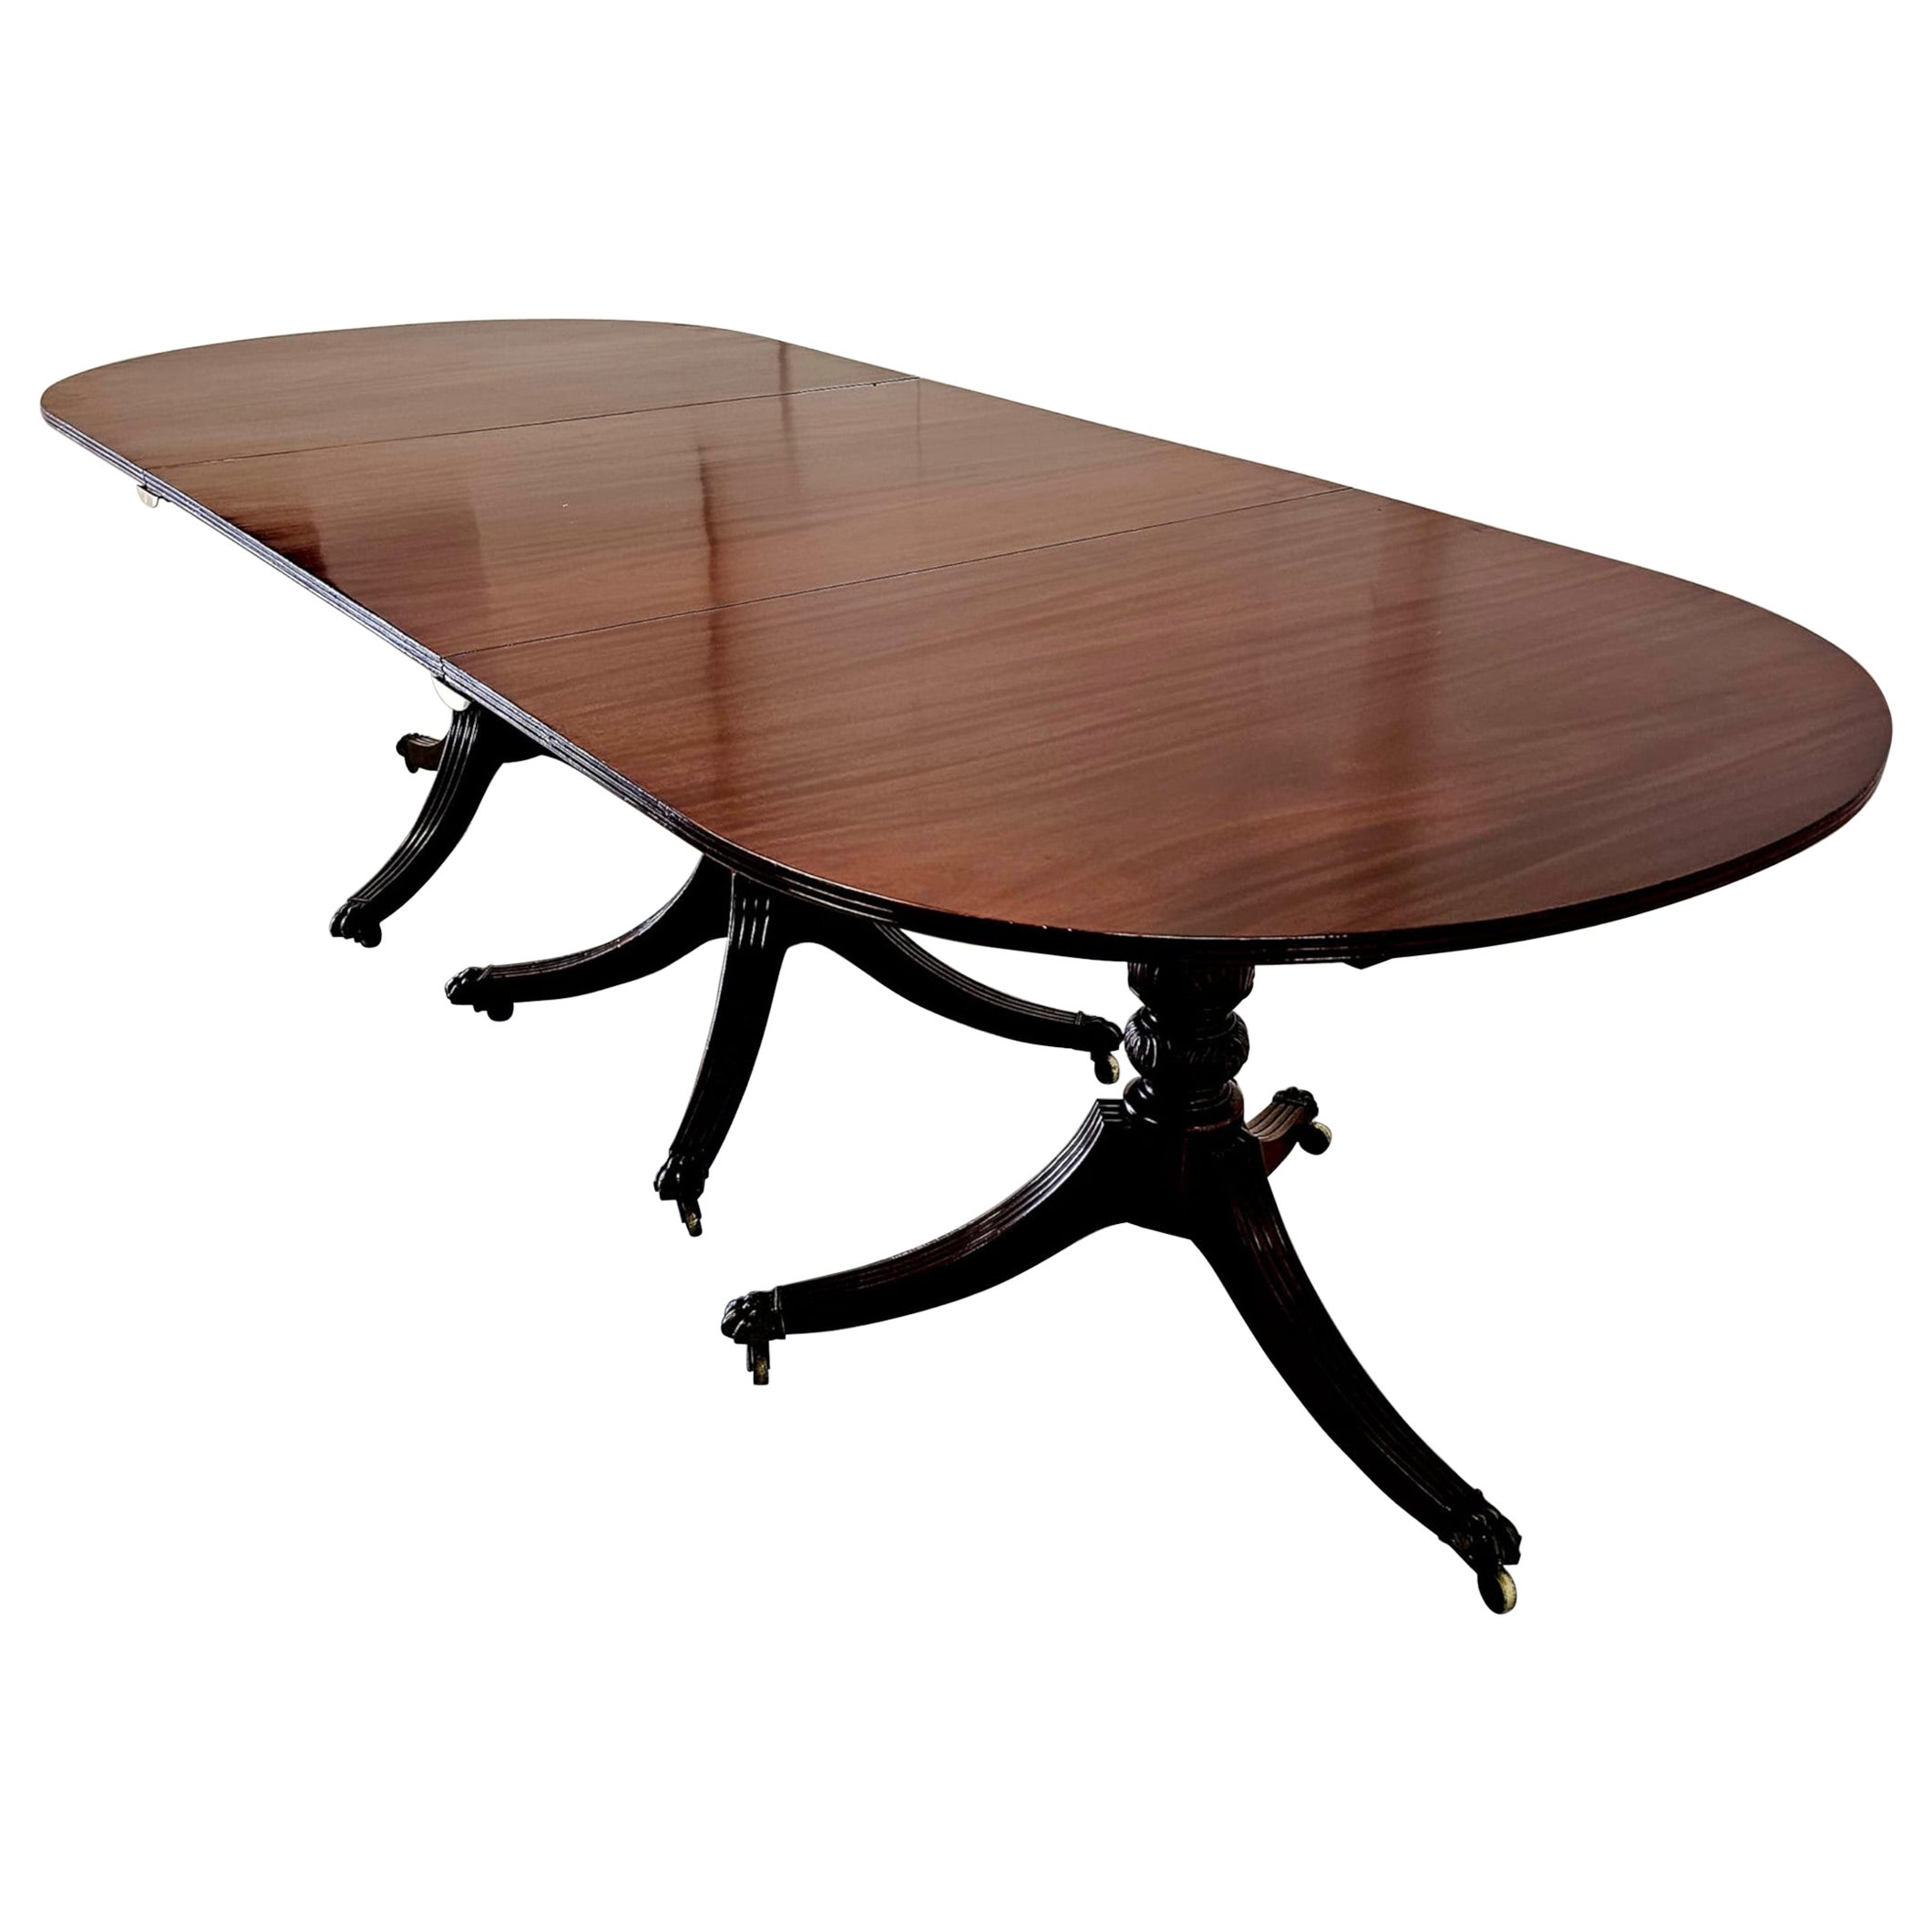 A Very Fine Early 20th Century Regency Style D-End Dining Room Table For Sale